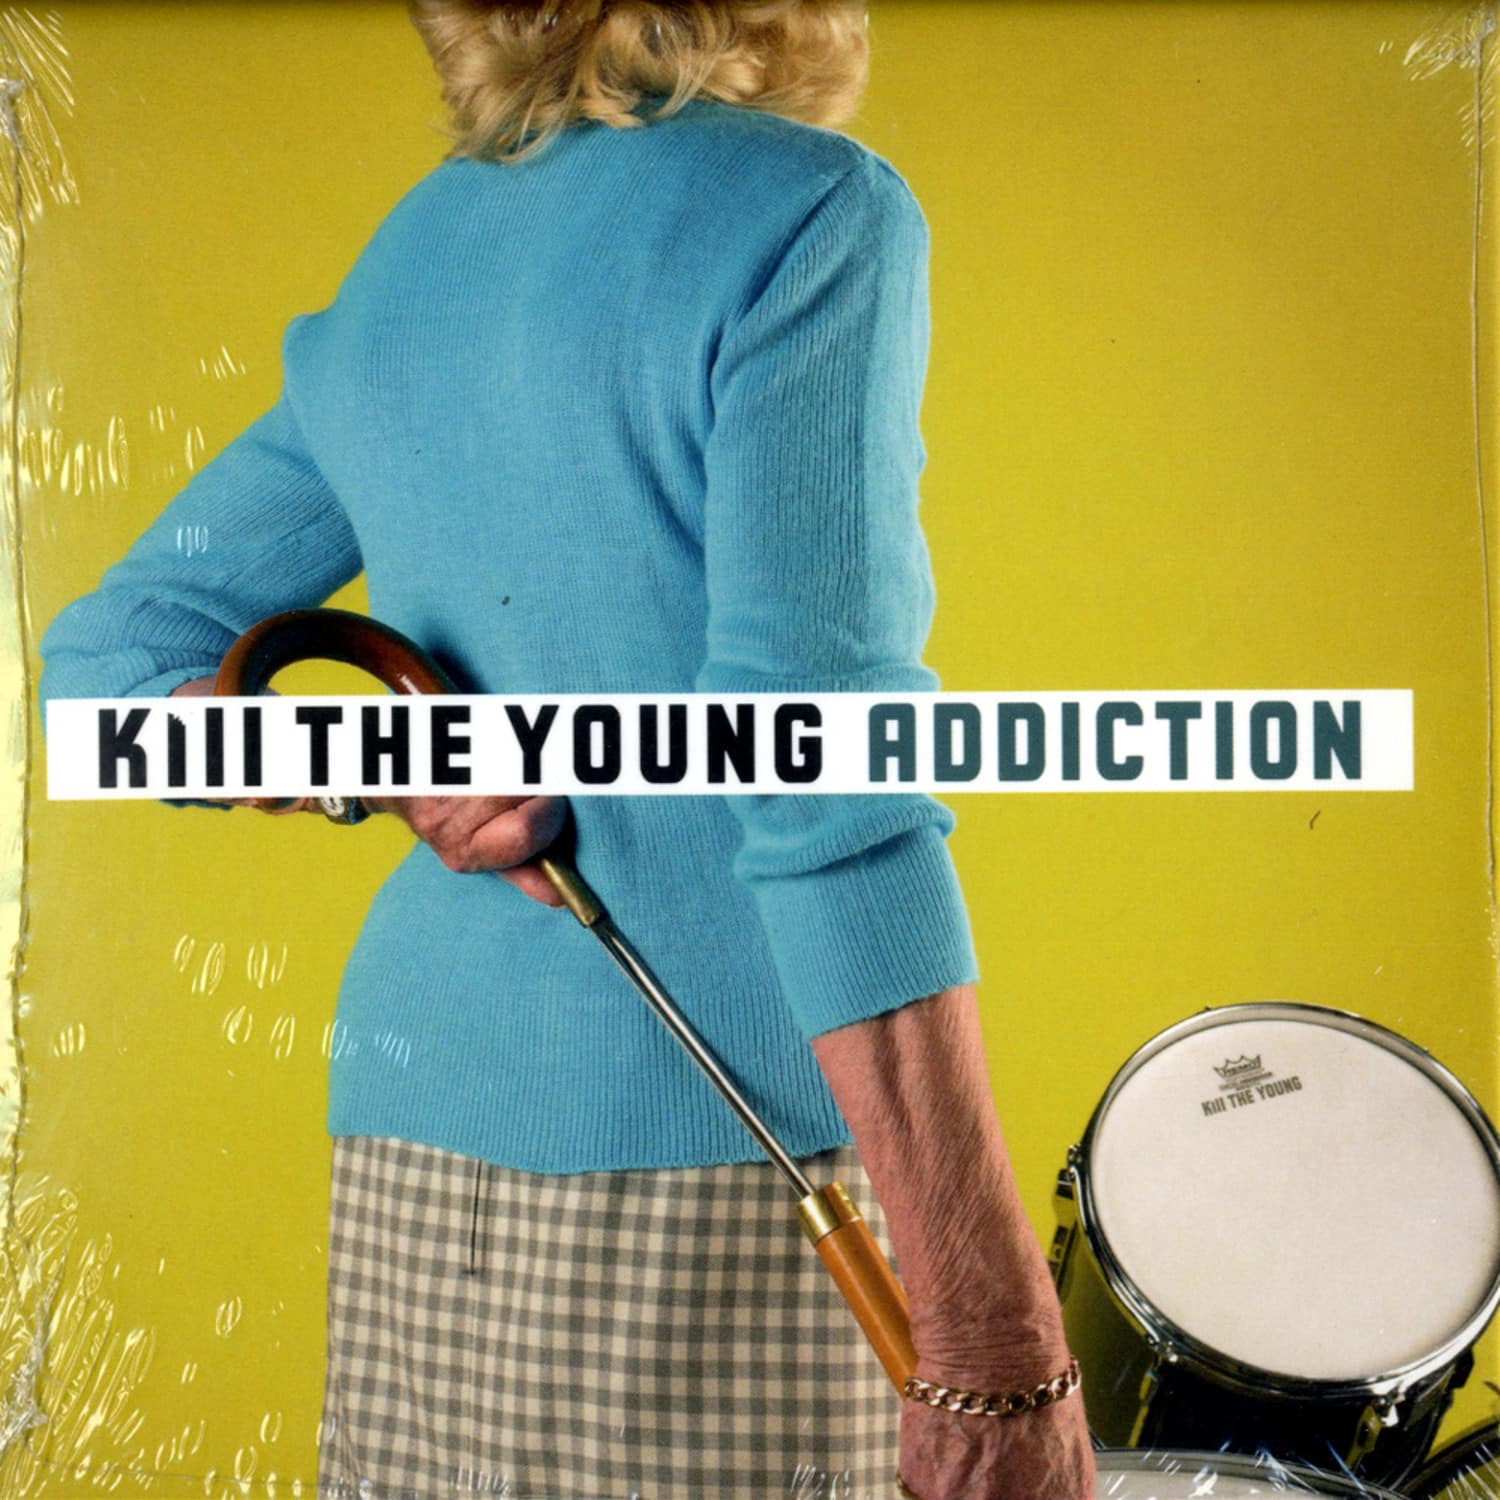 Kill The Young - ADDICTION 